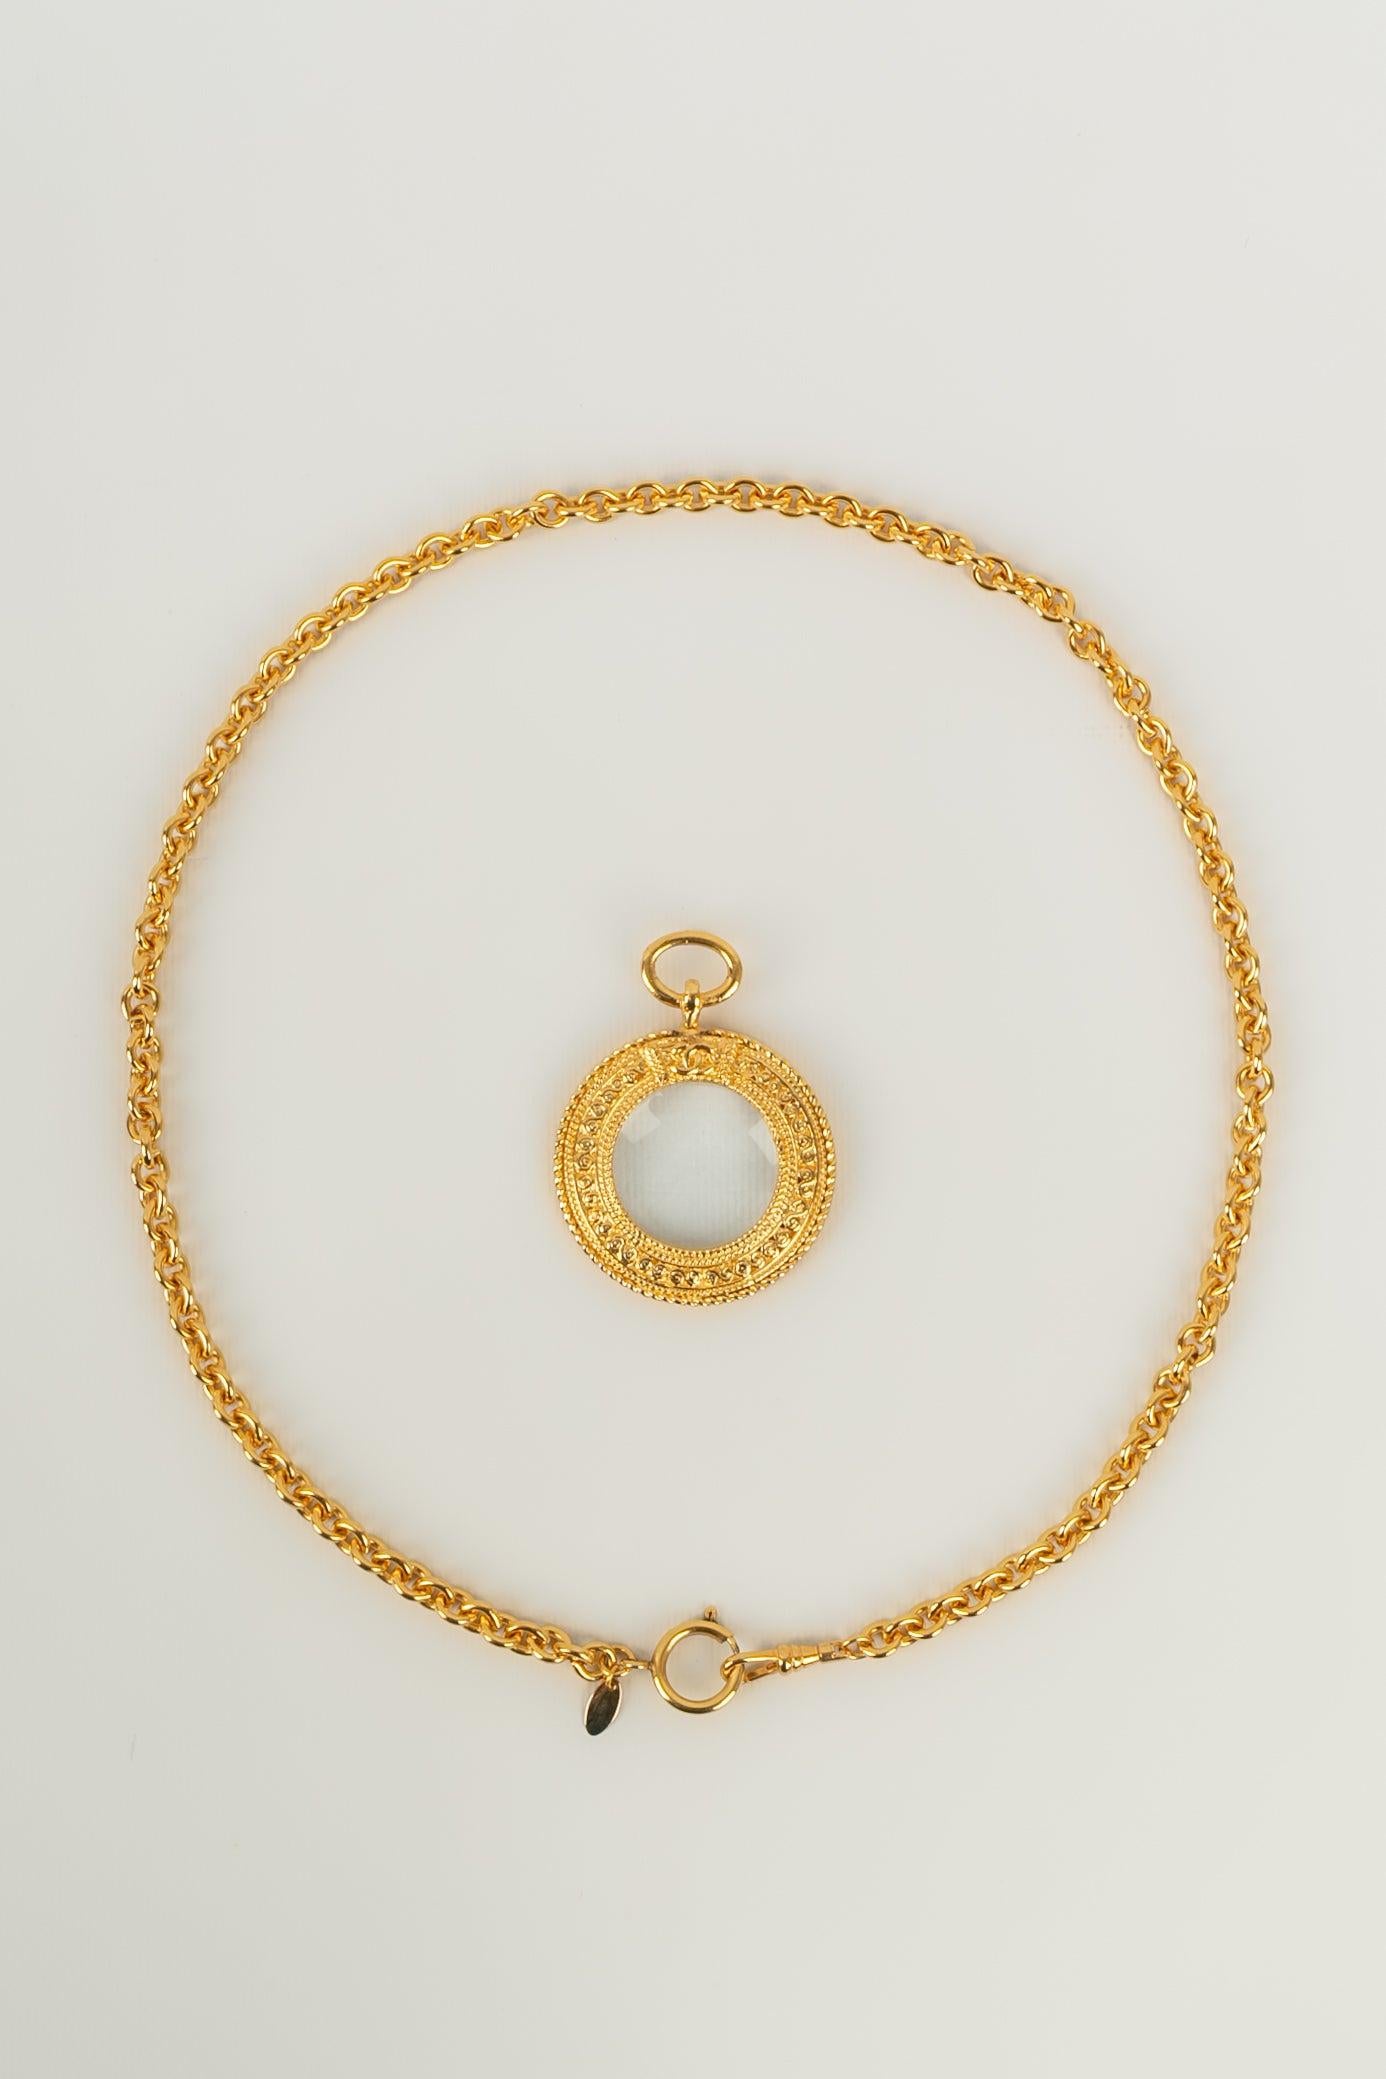 Chanel Magnifying Glass Necklace in Gold Plated Metal 1